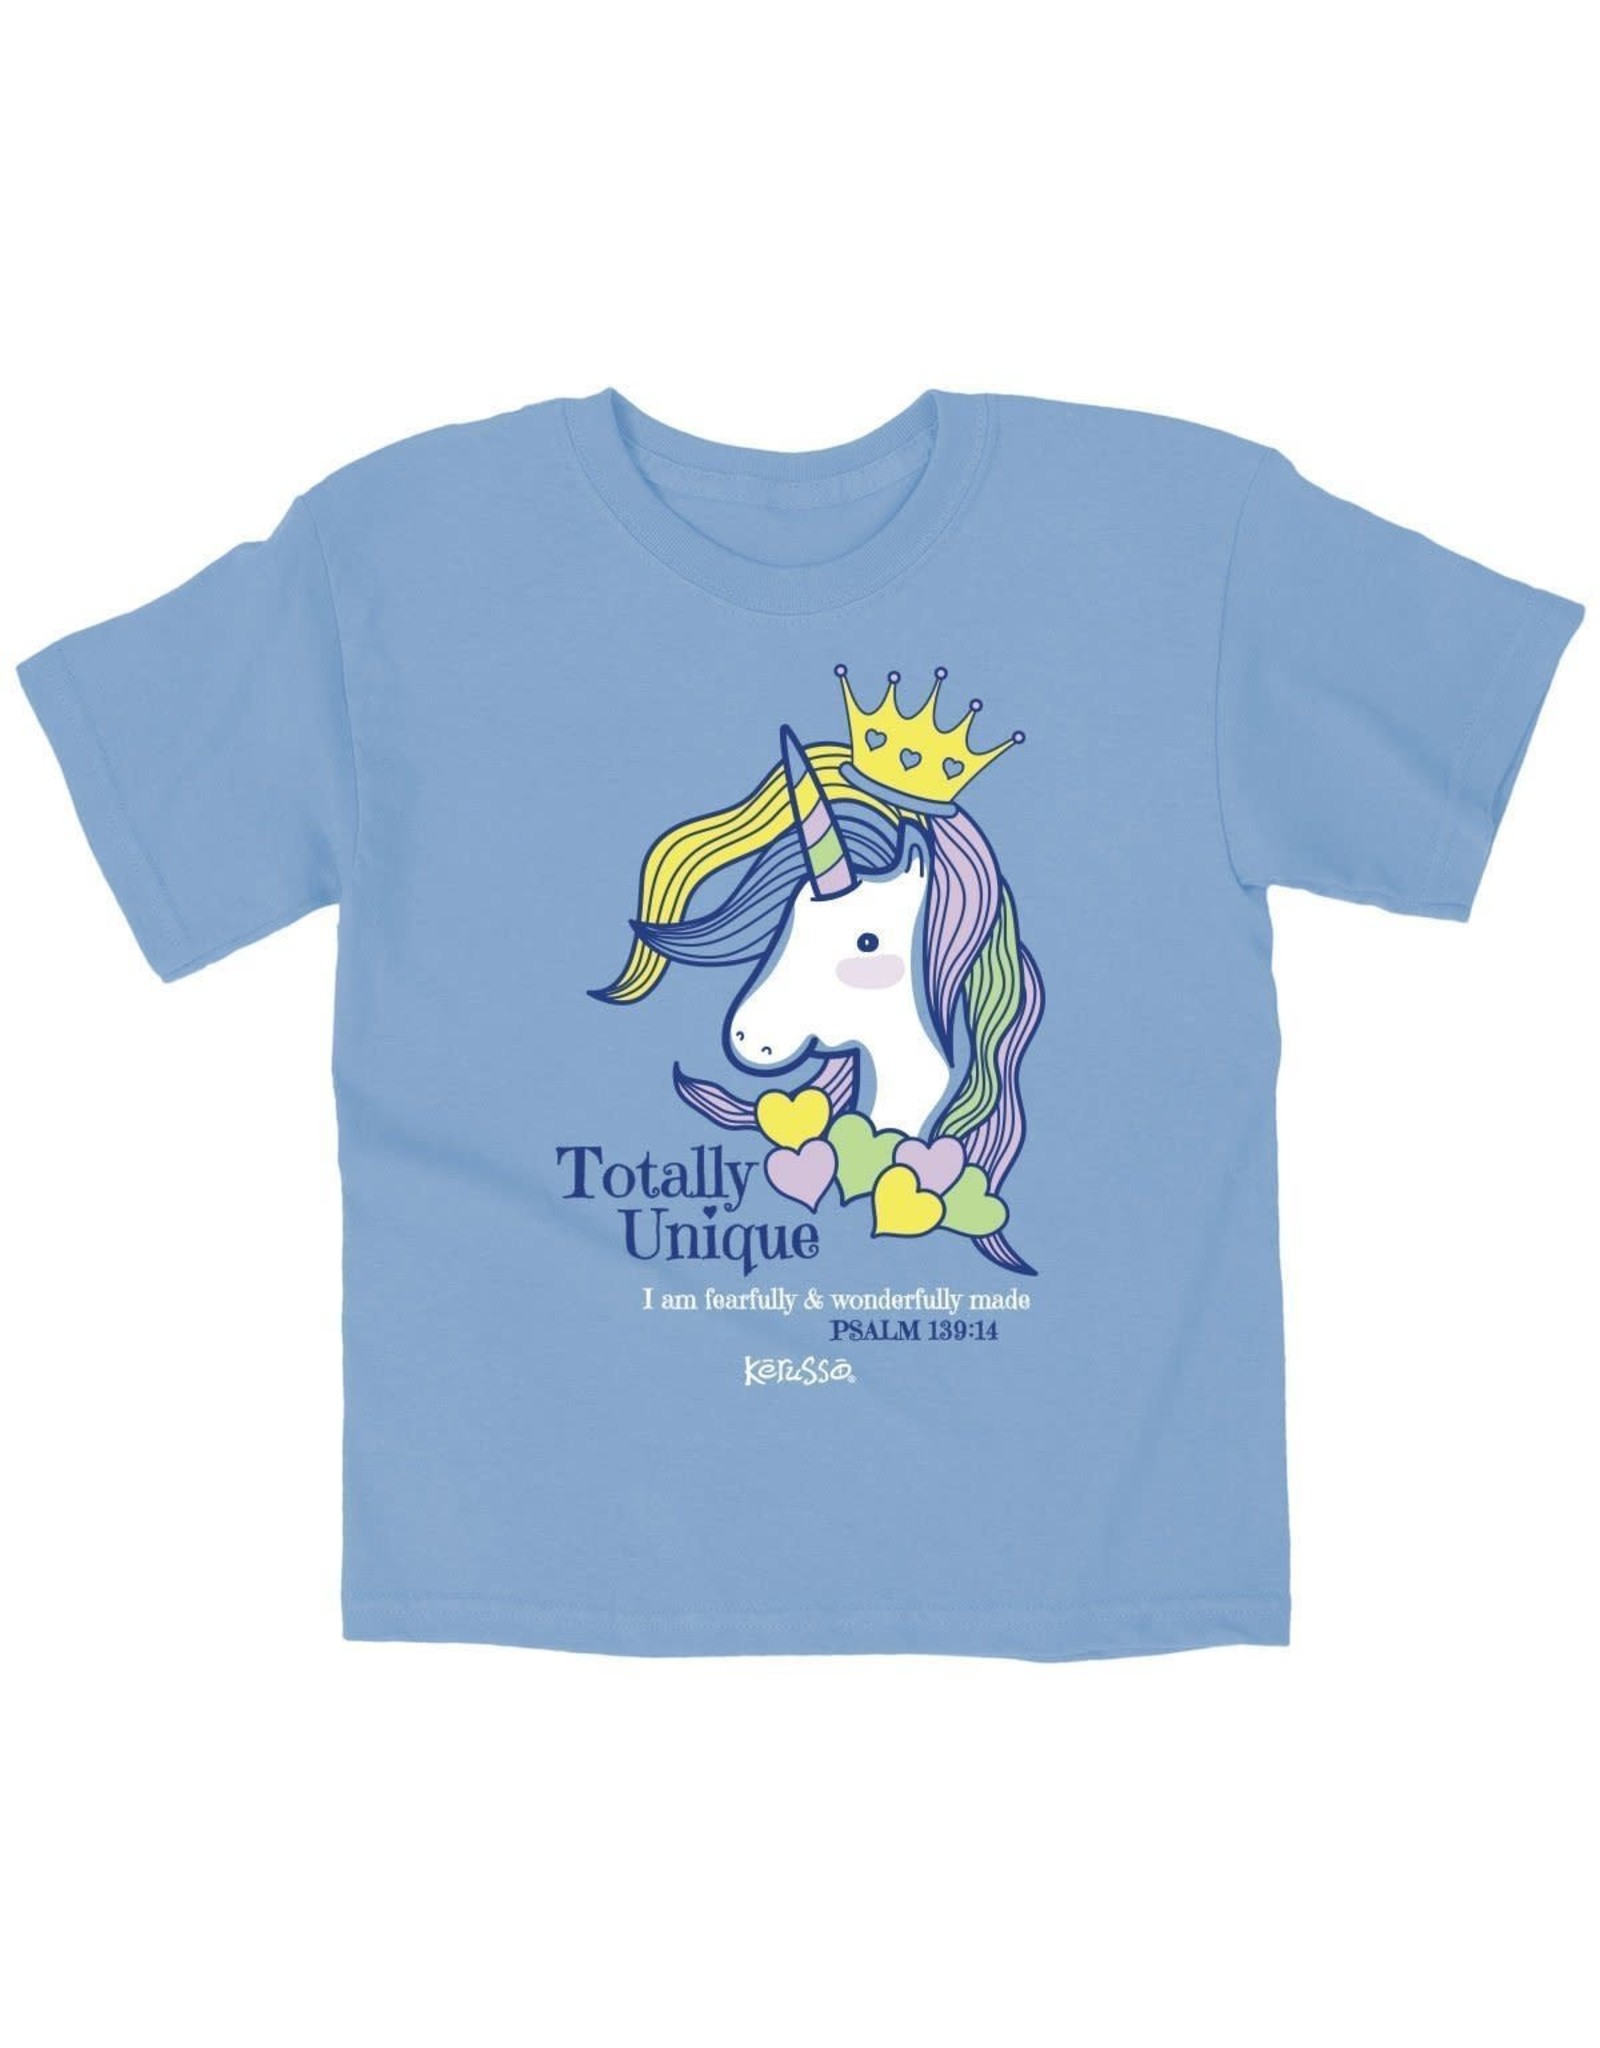 Kids Shirts Gift Unicorn, - Boutique Supply Reilly\'s Totally & Unique Church 